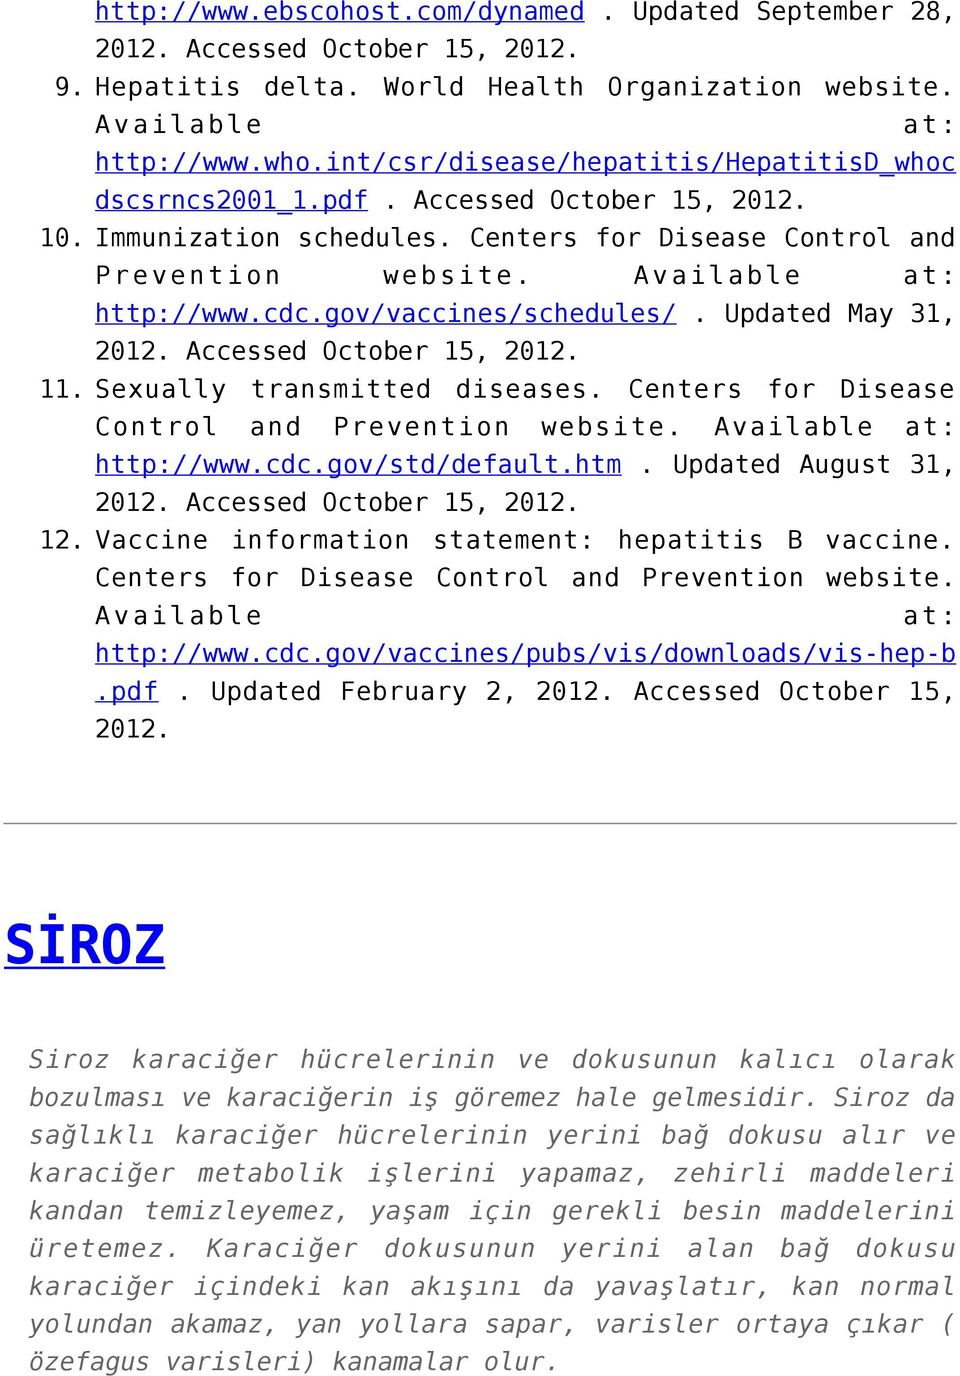 gov/vaccines/schedules/. Updated May 31, 2012. Accessed October 15, 2012. 11. Sexually transmitted diseases. Centers for Disease Control and Prevention website. Available at: http://www.cdc.